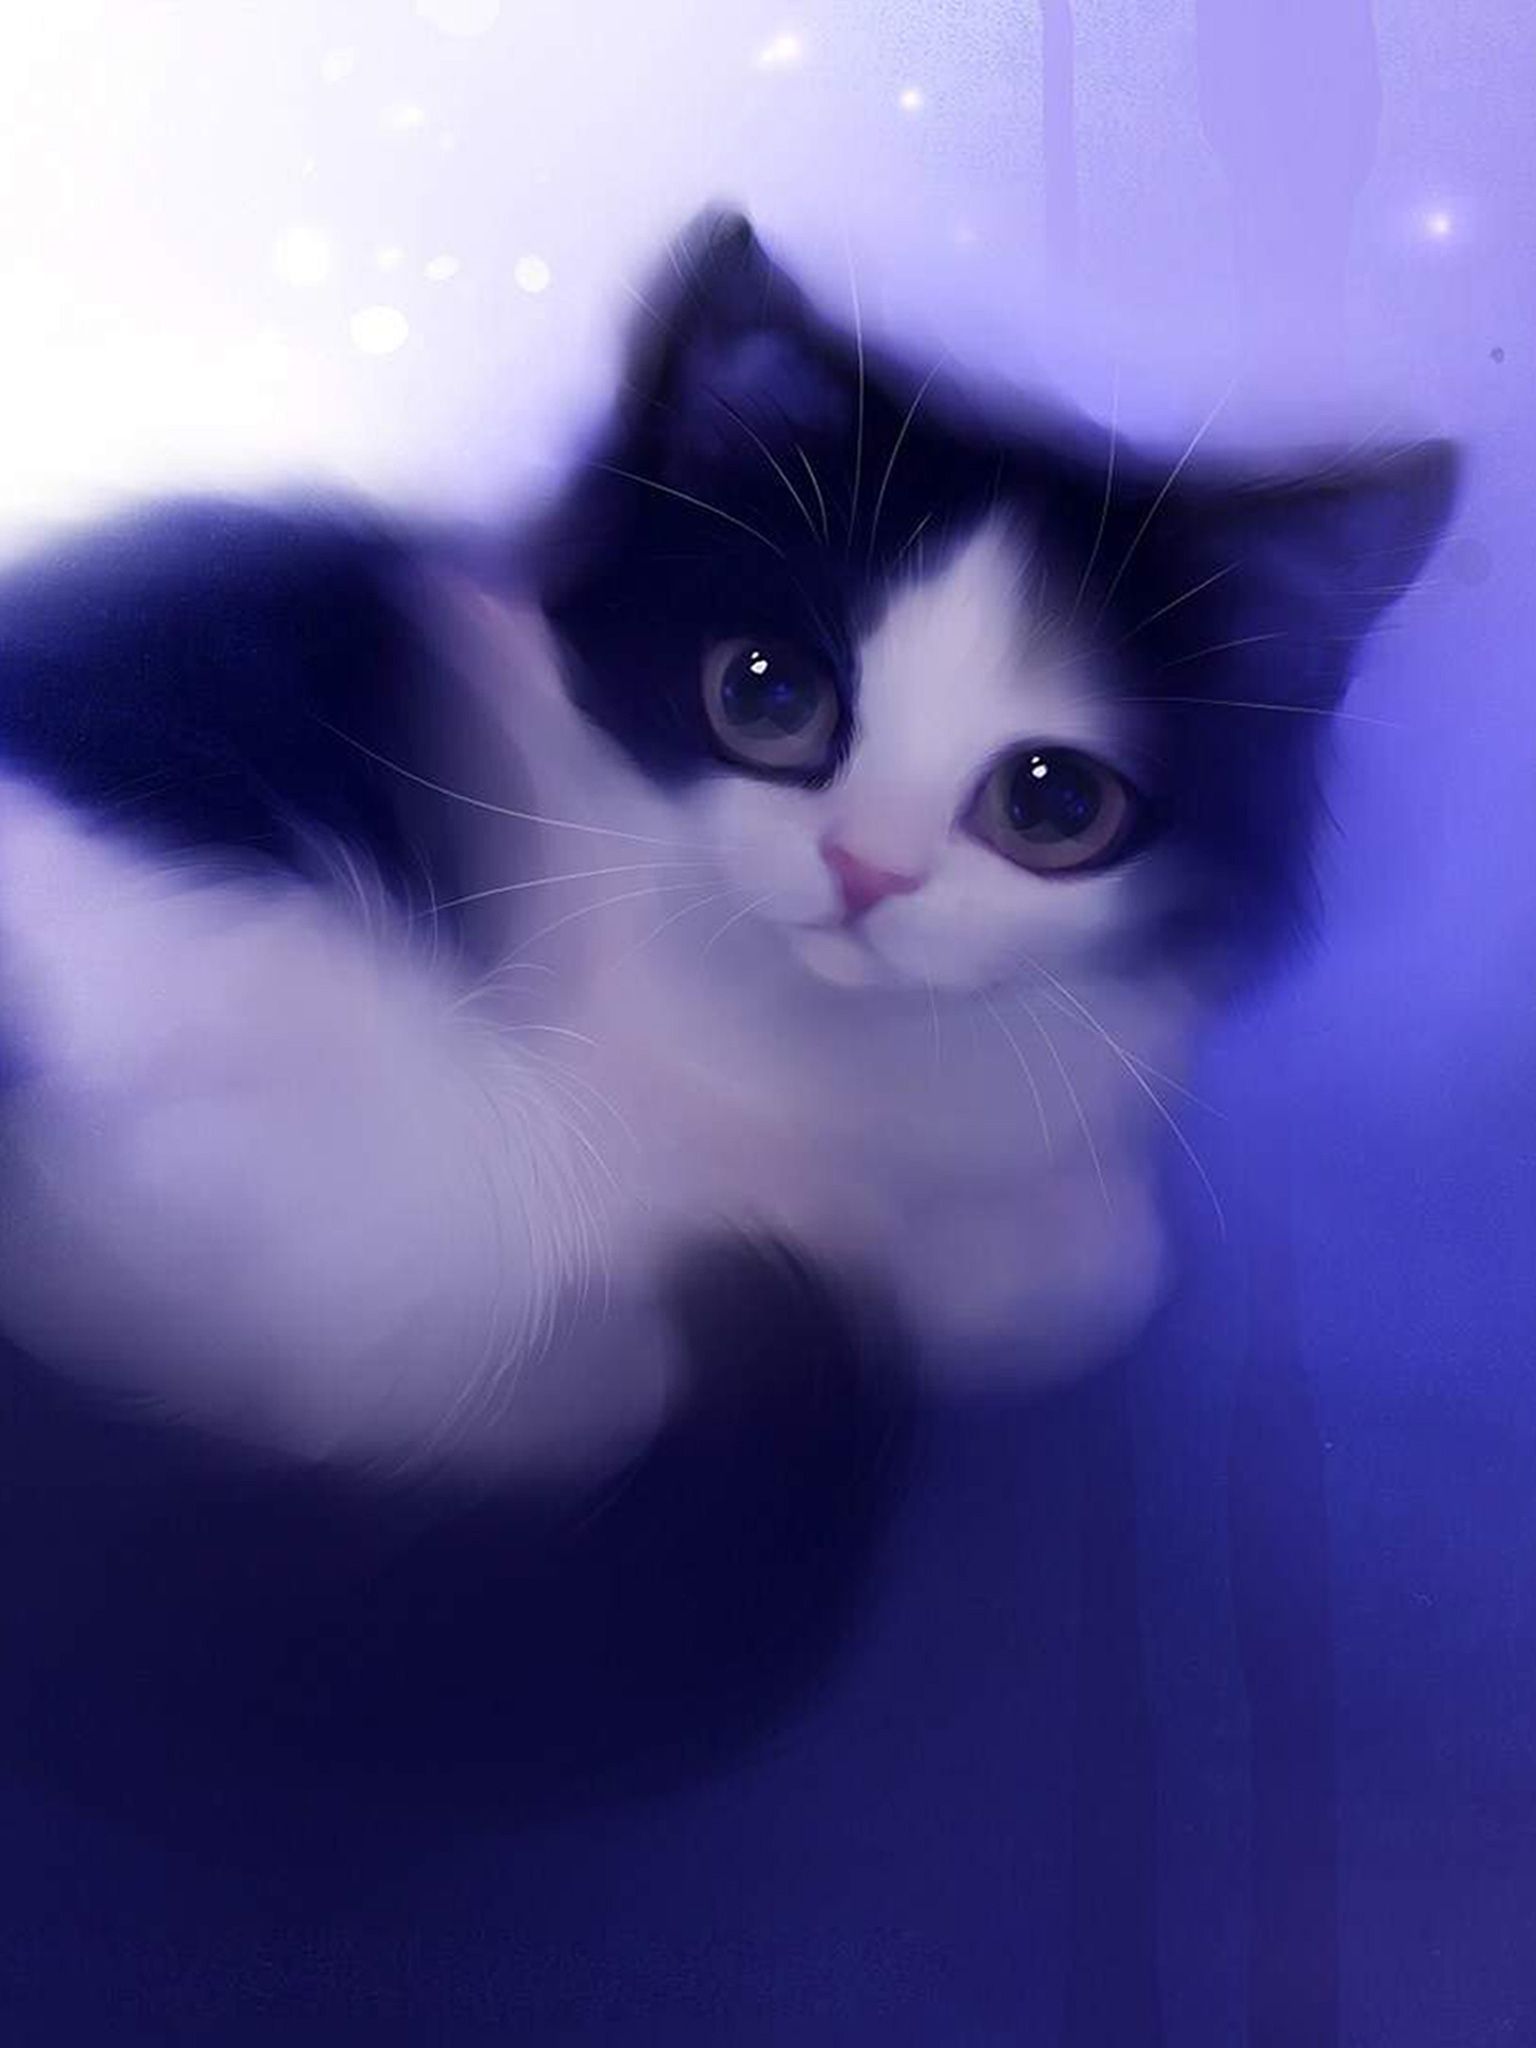 Aesthetic Cute Kitten Animation Wallpapers - Wallpaper Cave